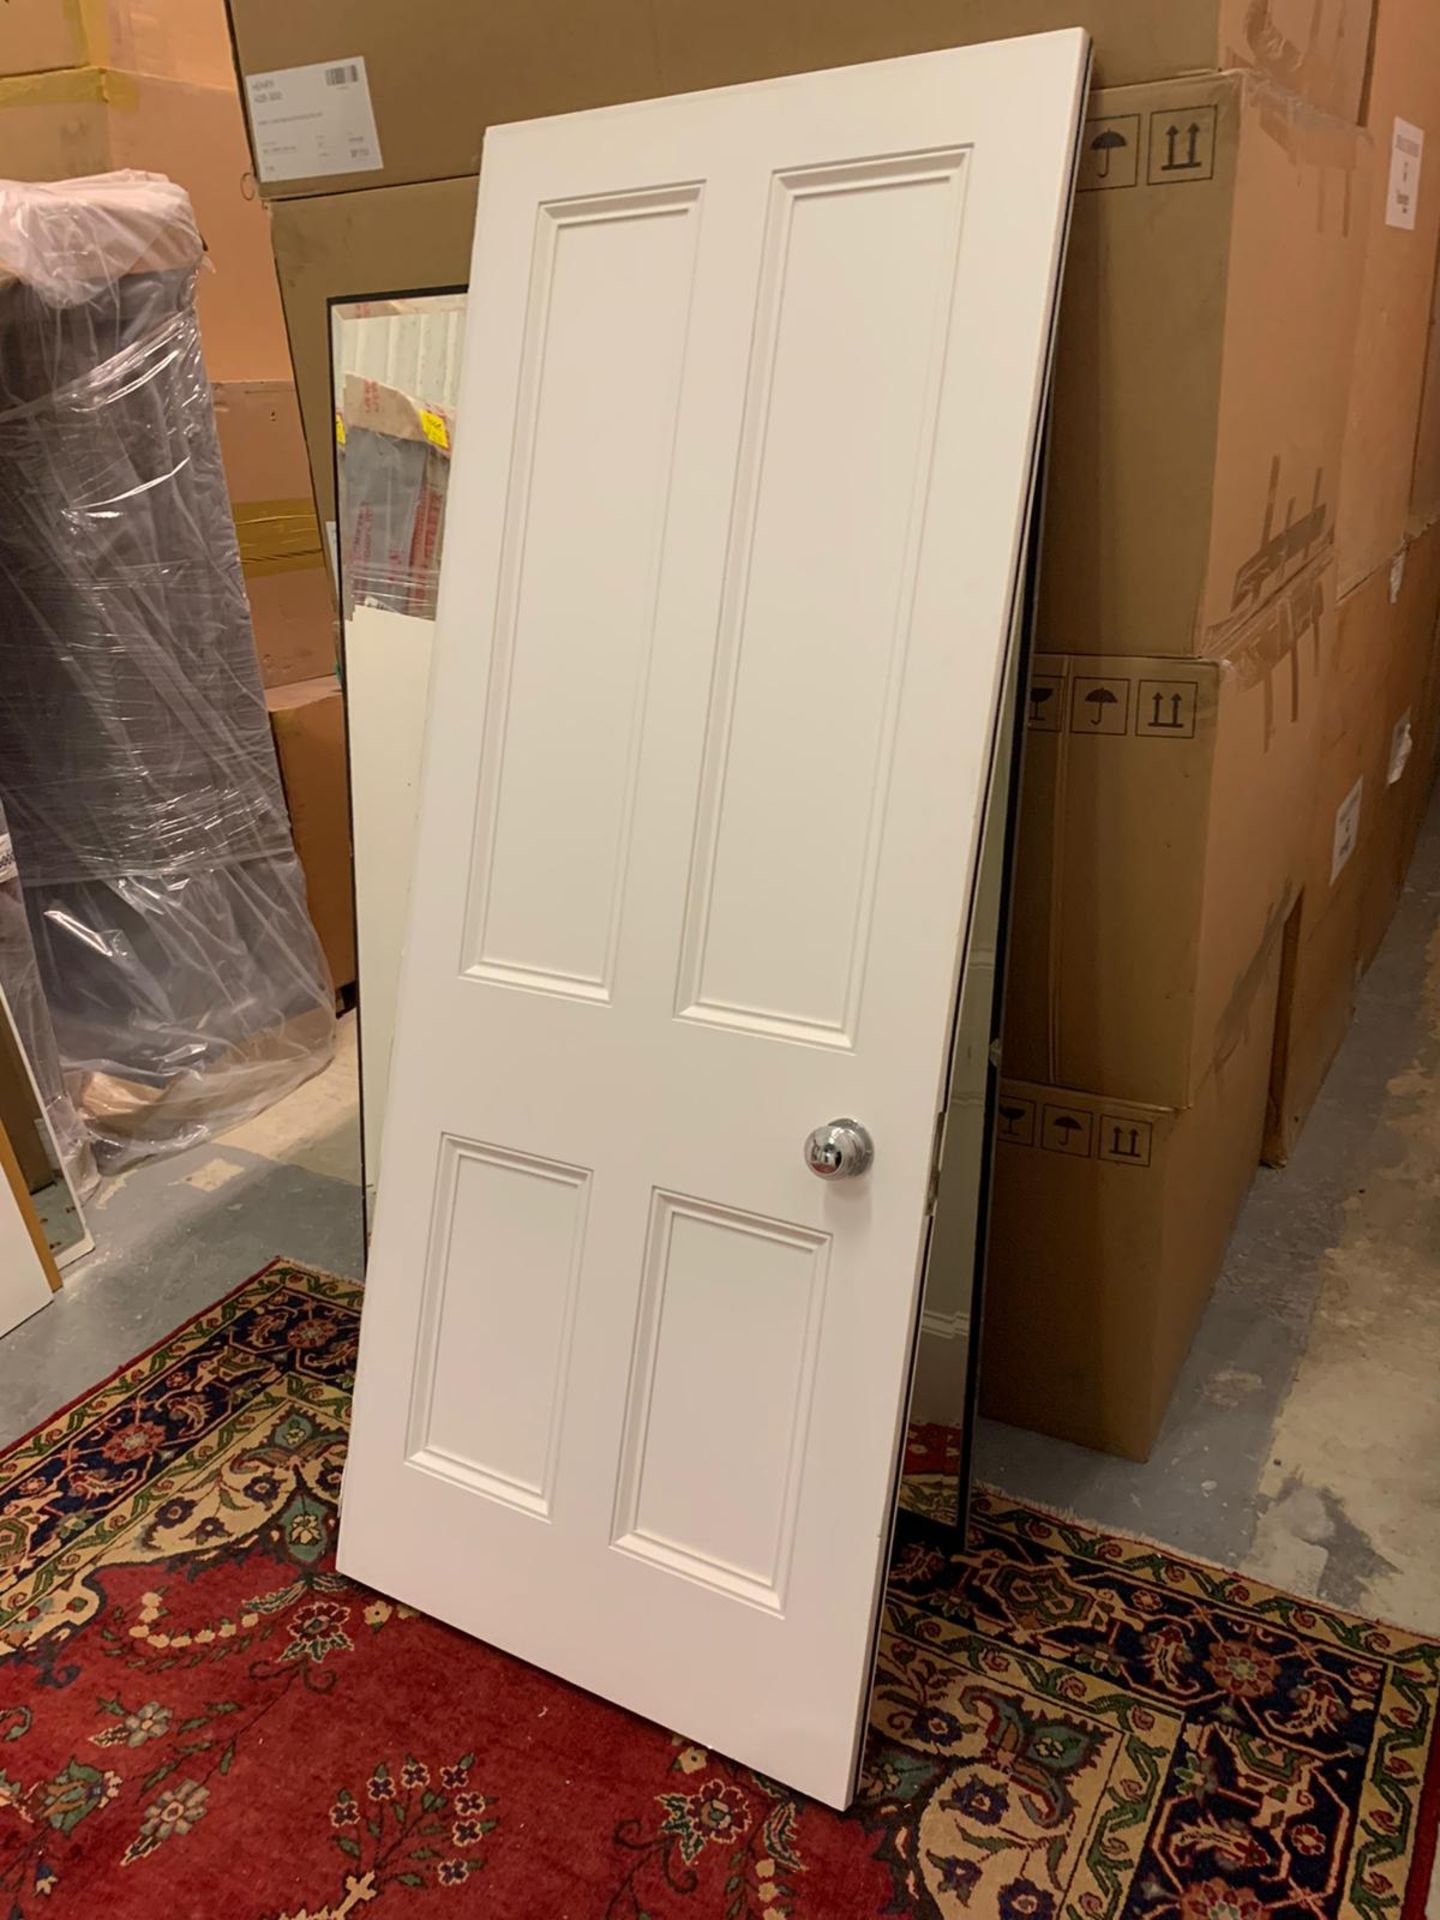 Set Of Two White Fire Doors Complete With Door Frame Each Door 83cm X 206cm X 5cm Consigned From A - Image 2 of 3